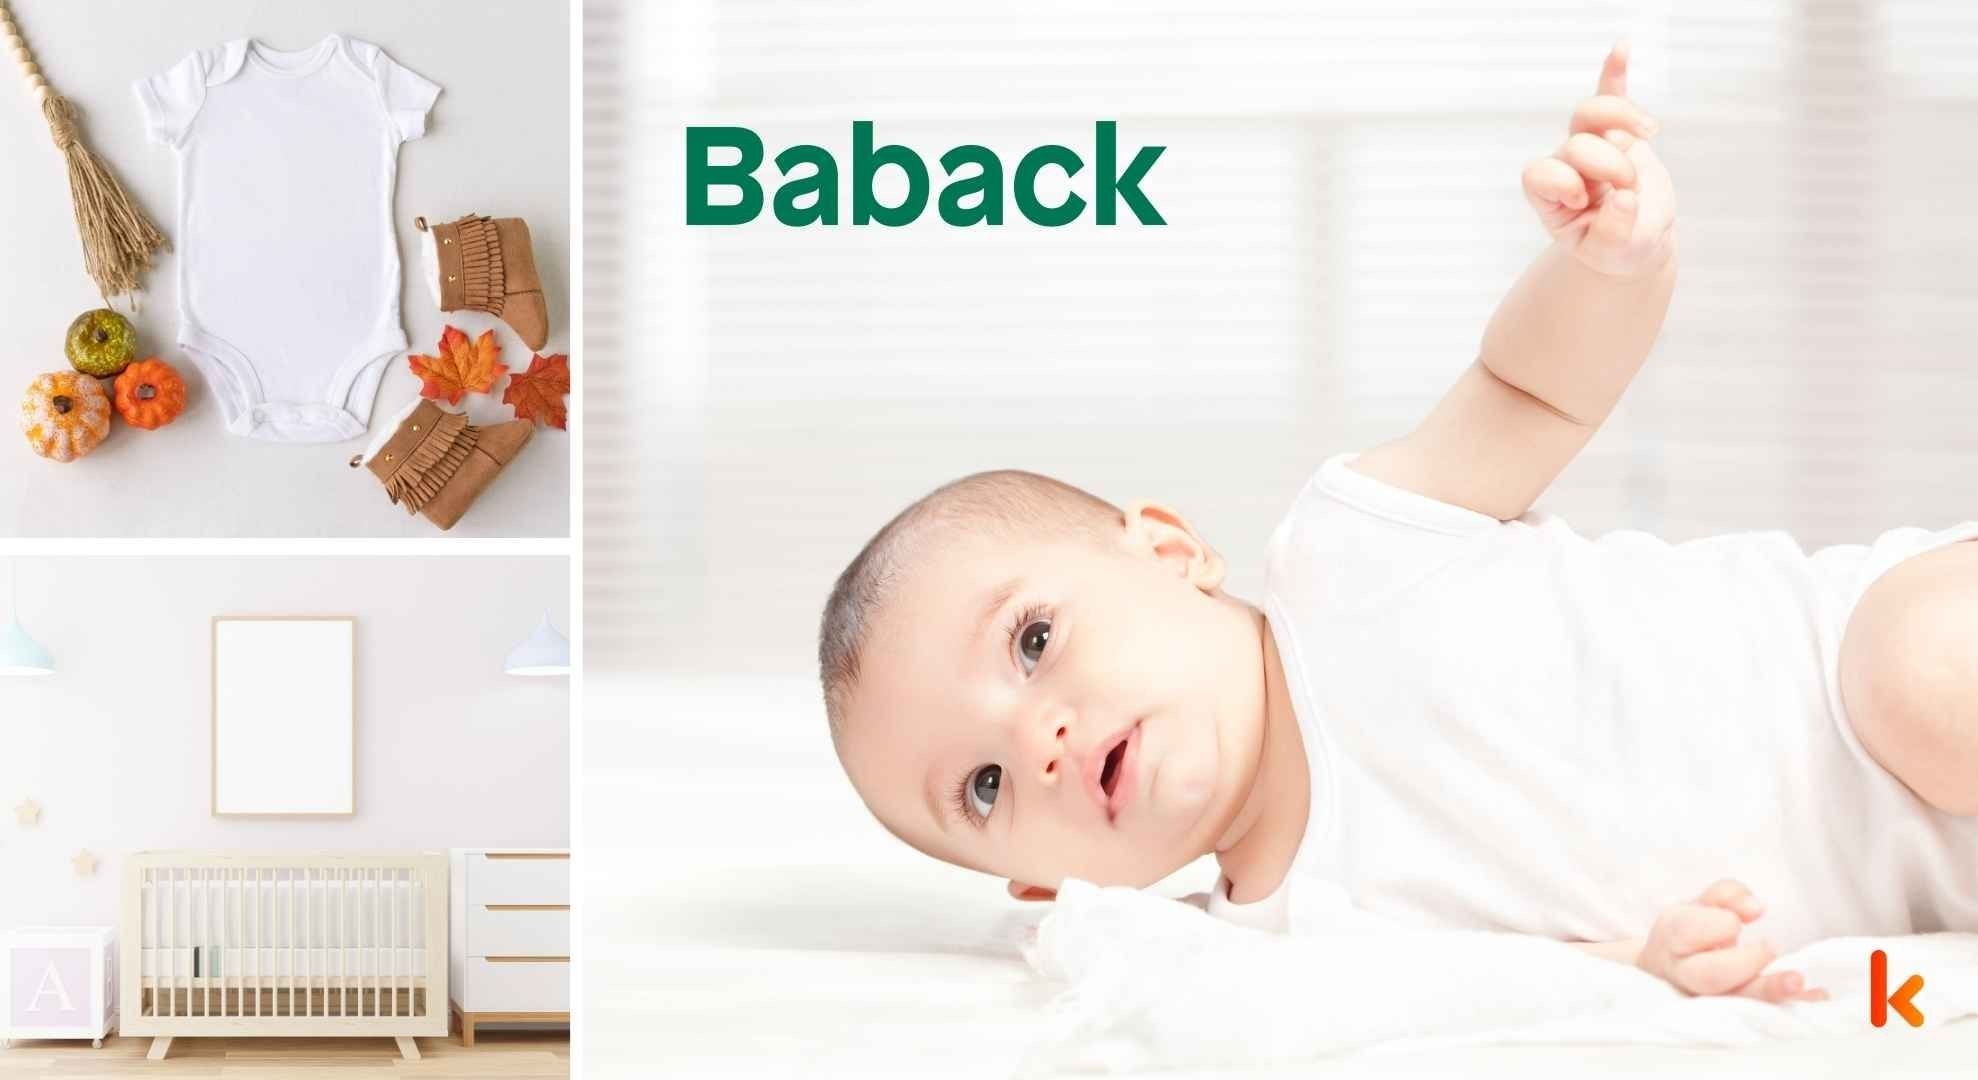 Meaning of the name Baback